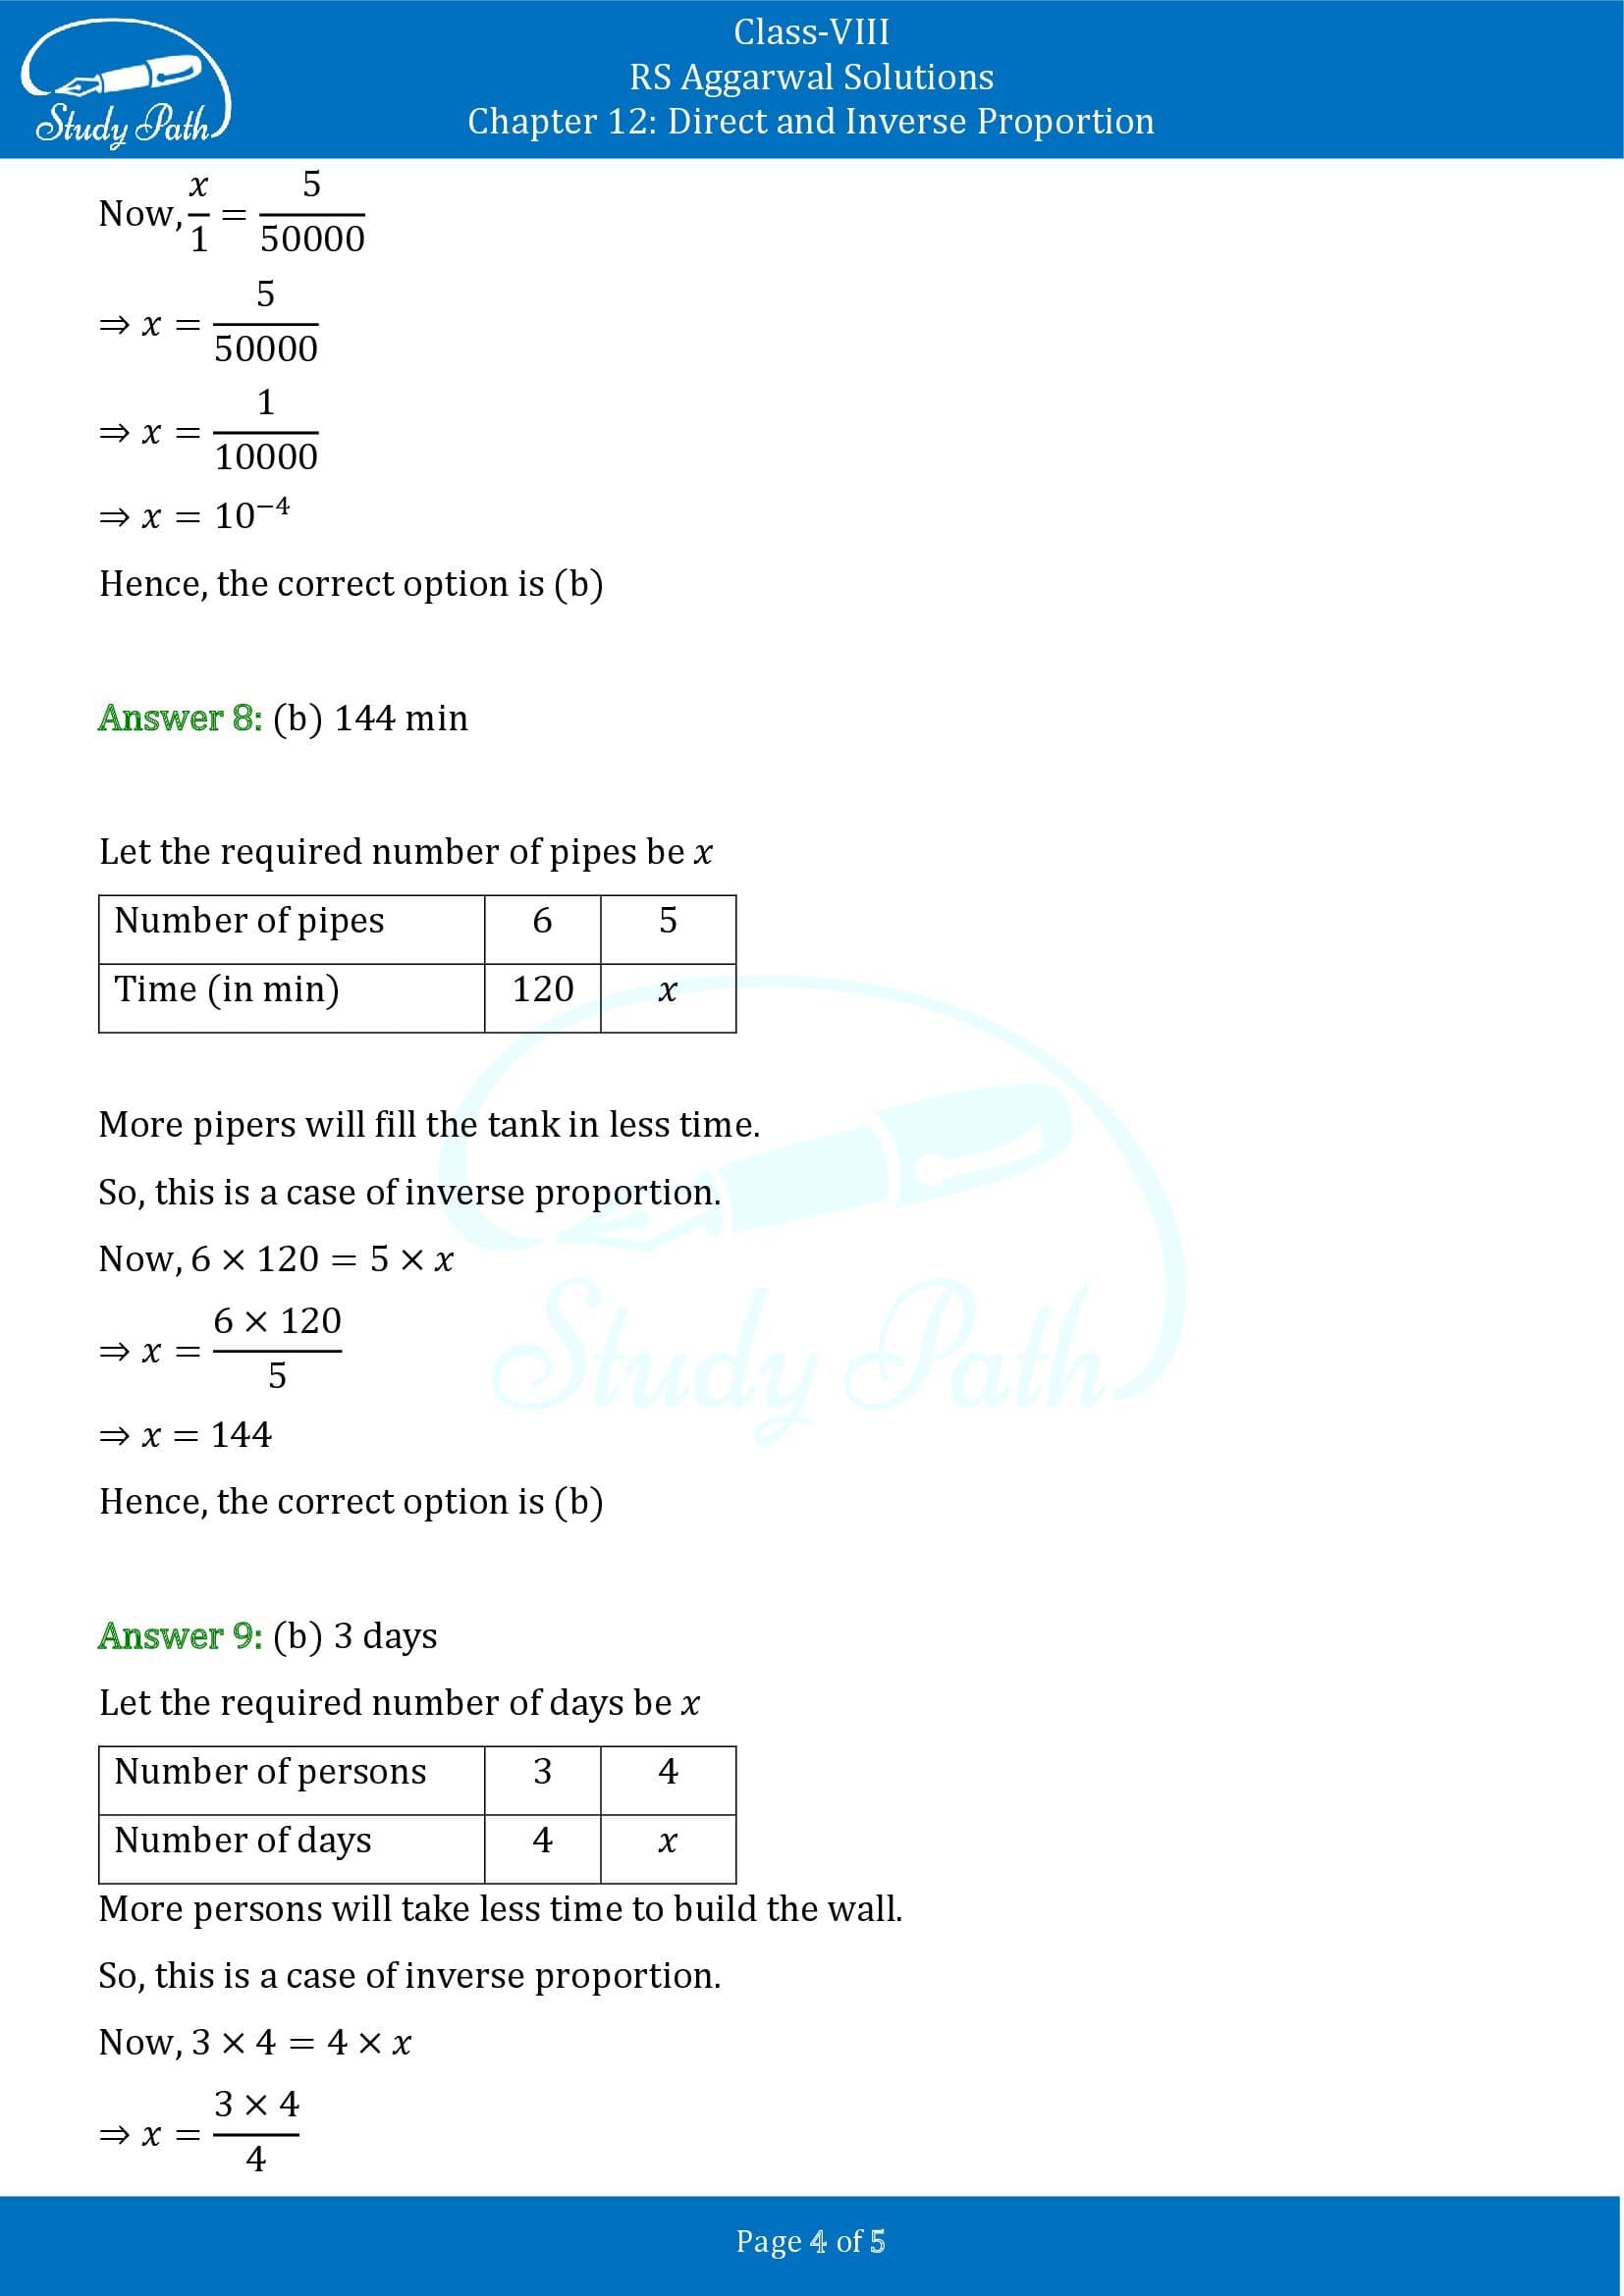 RS Aggarwal Solutions Class 8 Chapter 12 Direct and Inverse Proportion Exercise 12C MCQs 00004